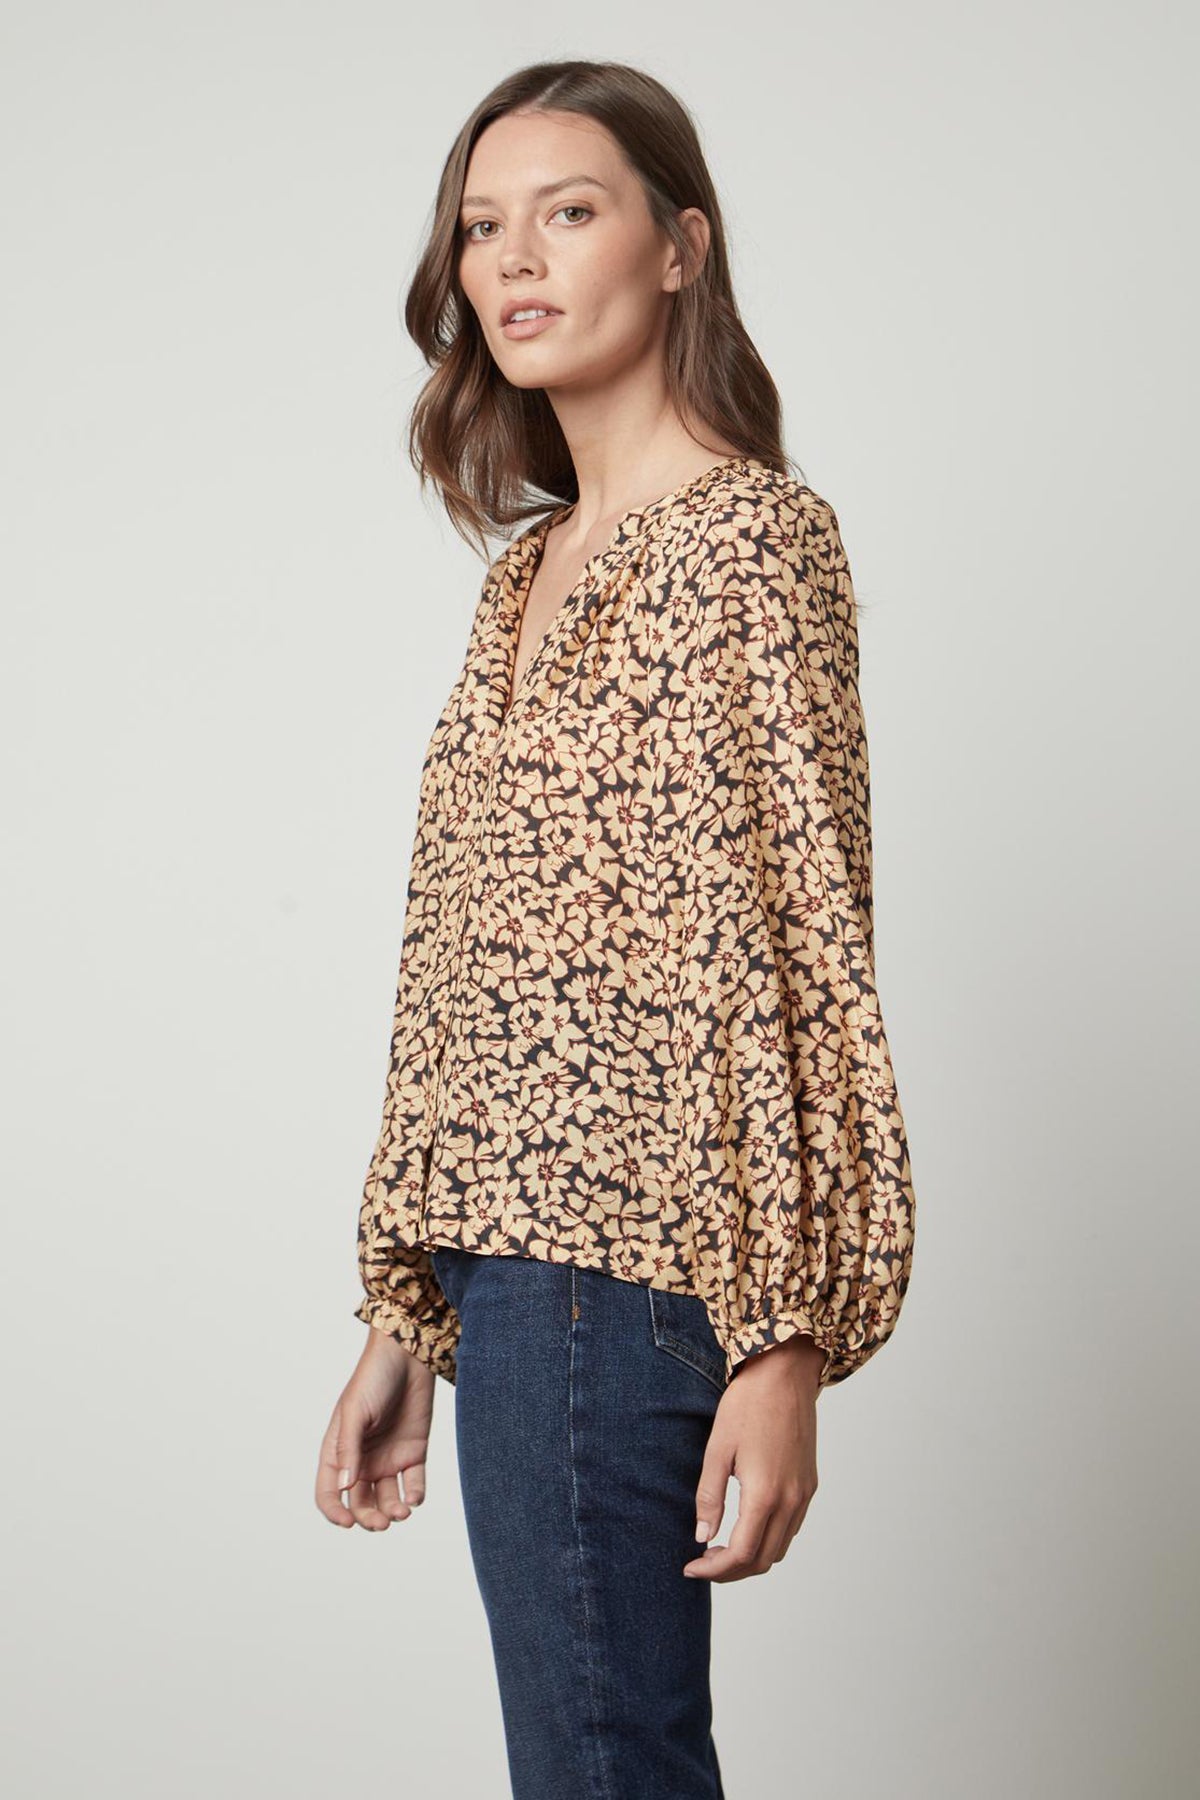 A woman wearing a Velvet by Graham & Spencer MELINDA PRINTED BUTTON-UP TOP blouse.-26895474360513